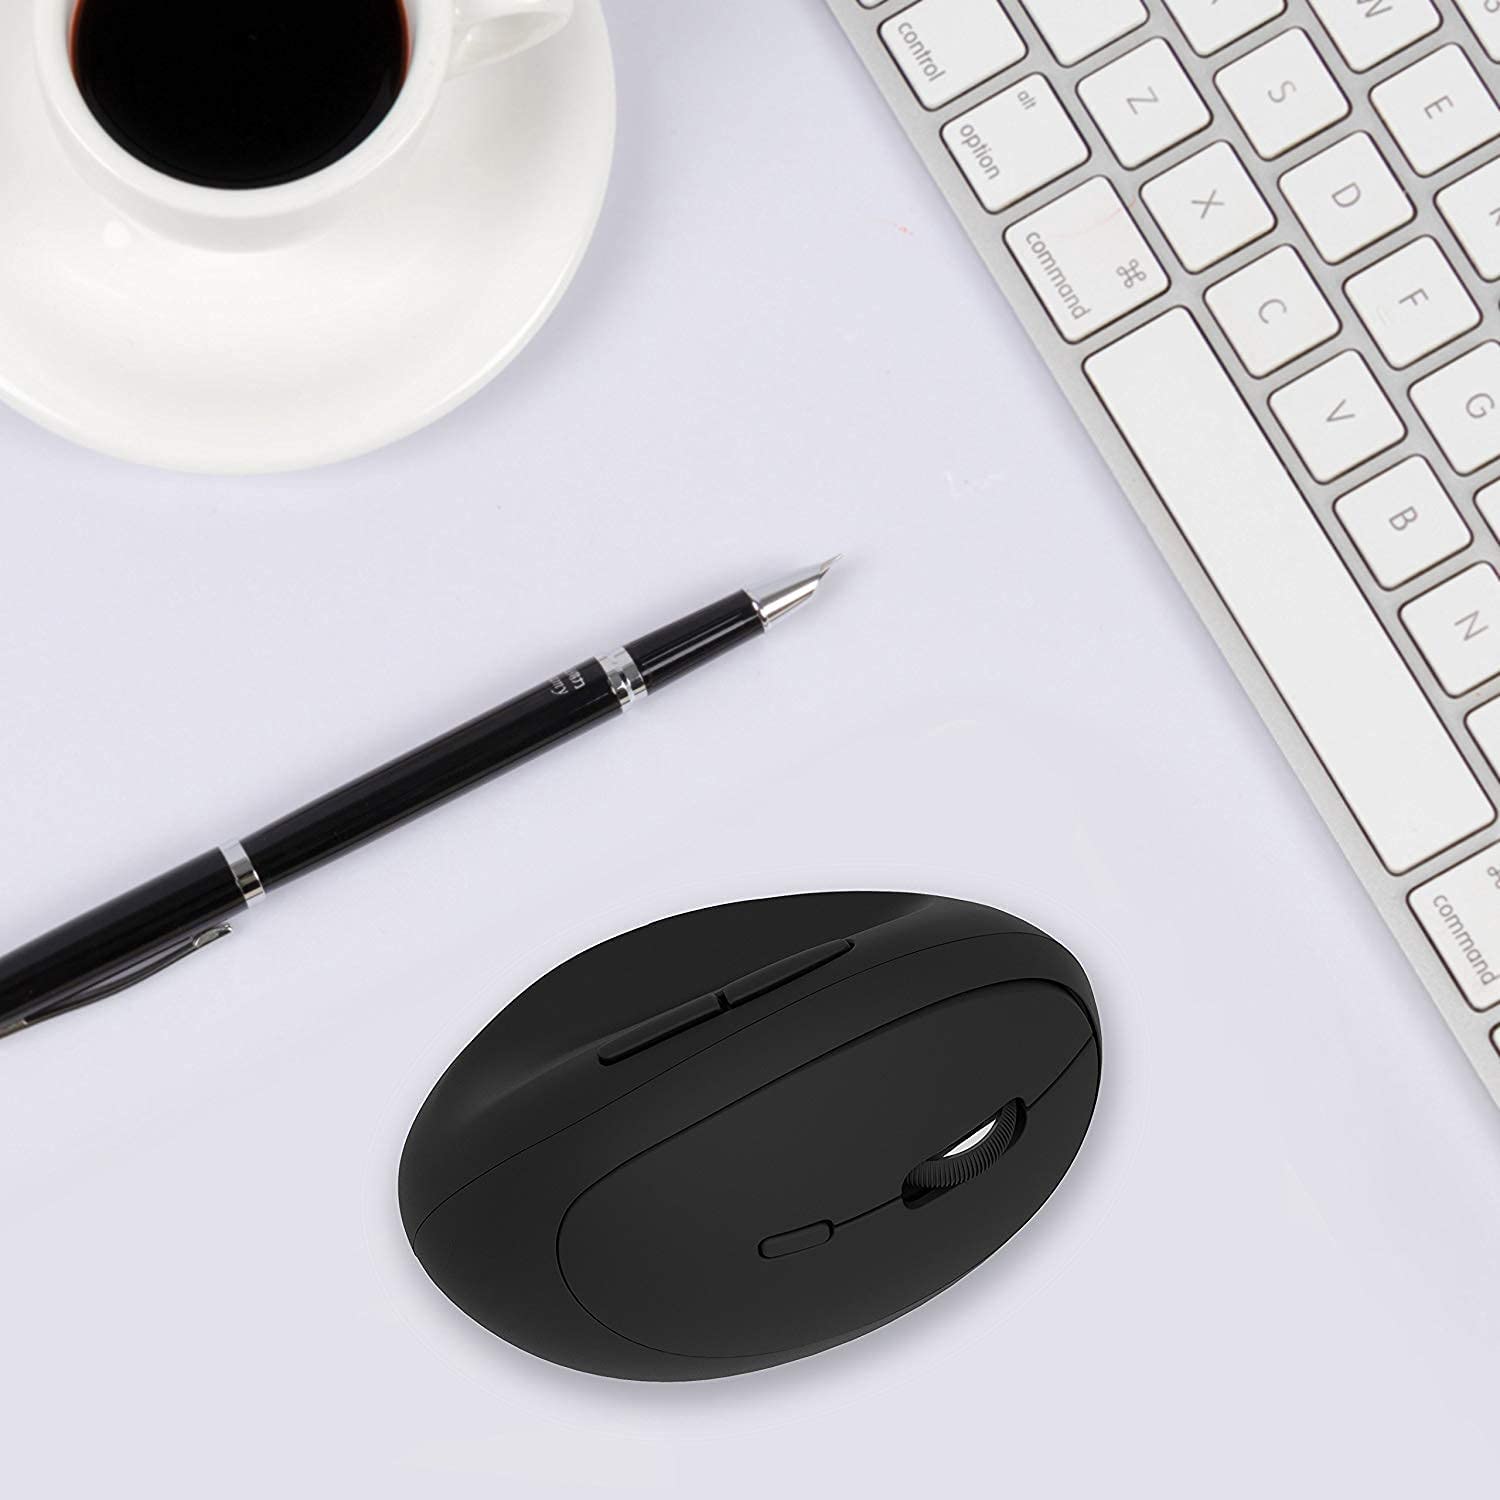 MV009 Vertical Wireless Mouse (2.4G USB Wireless + 1 AA Battery operated)